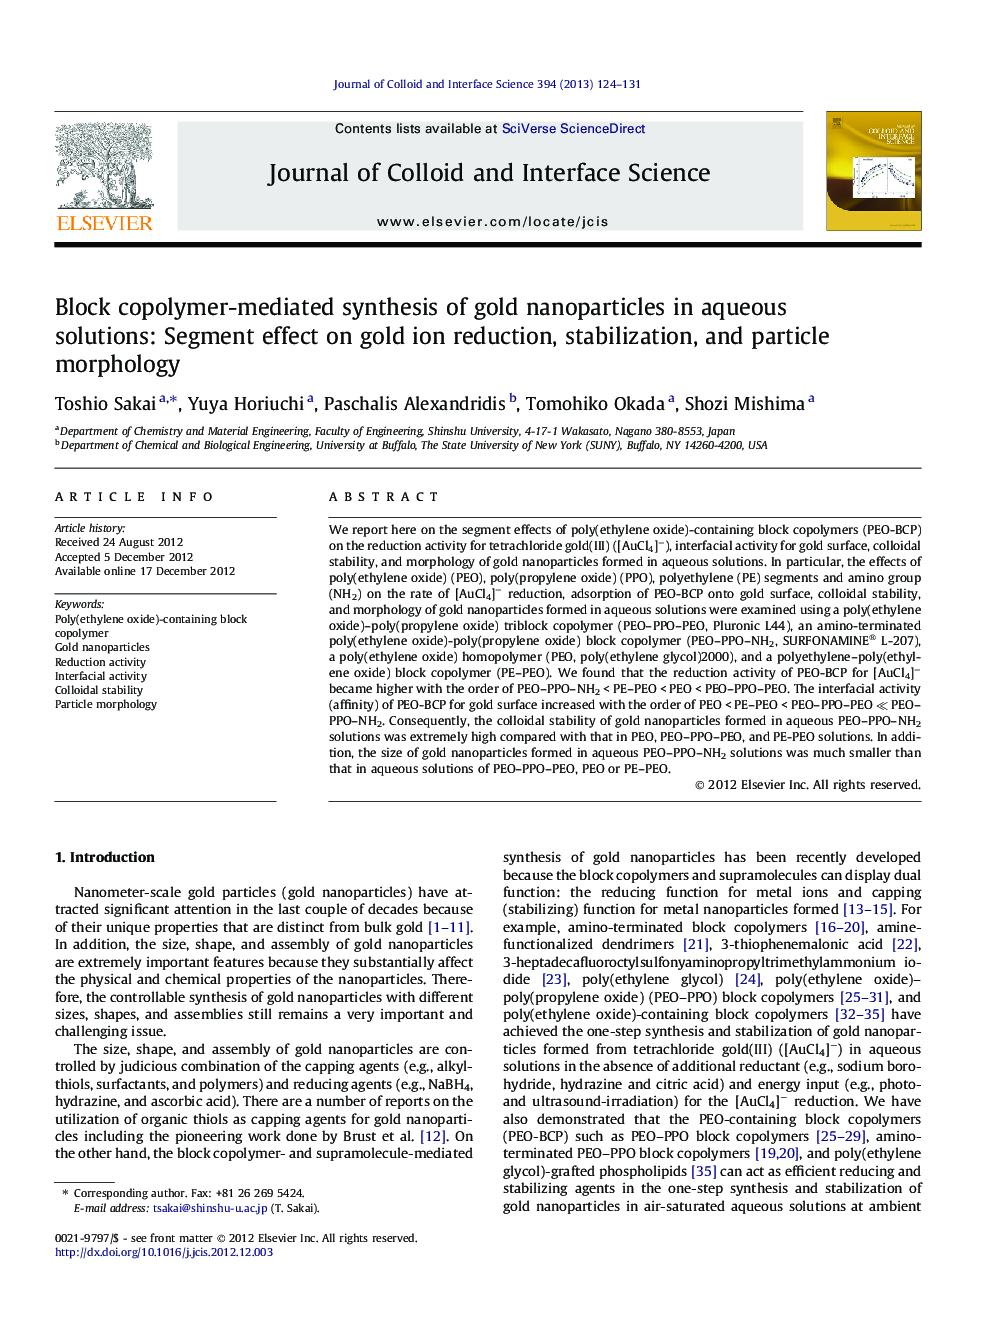 Block copolymer-mediated synthesis of gold nanoparticles in aqueous solutions: Segment effect on gold ion reduction, stabilization, and particle morphology